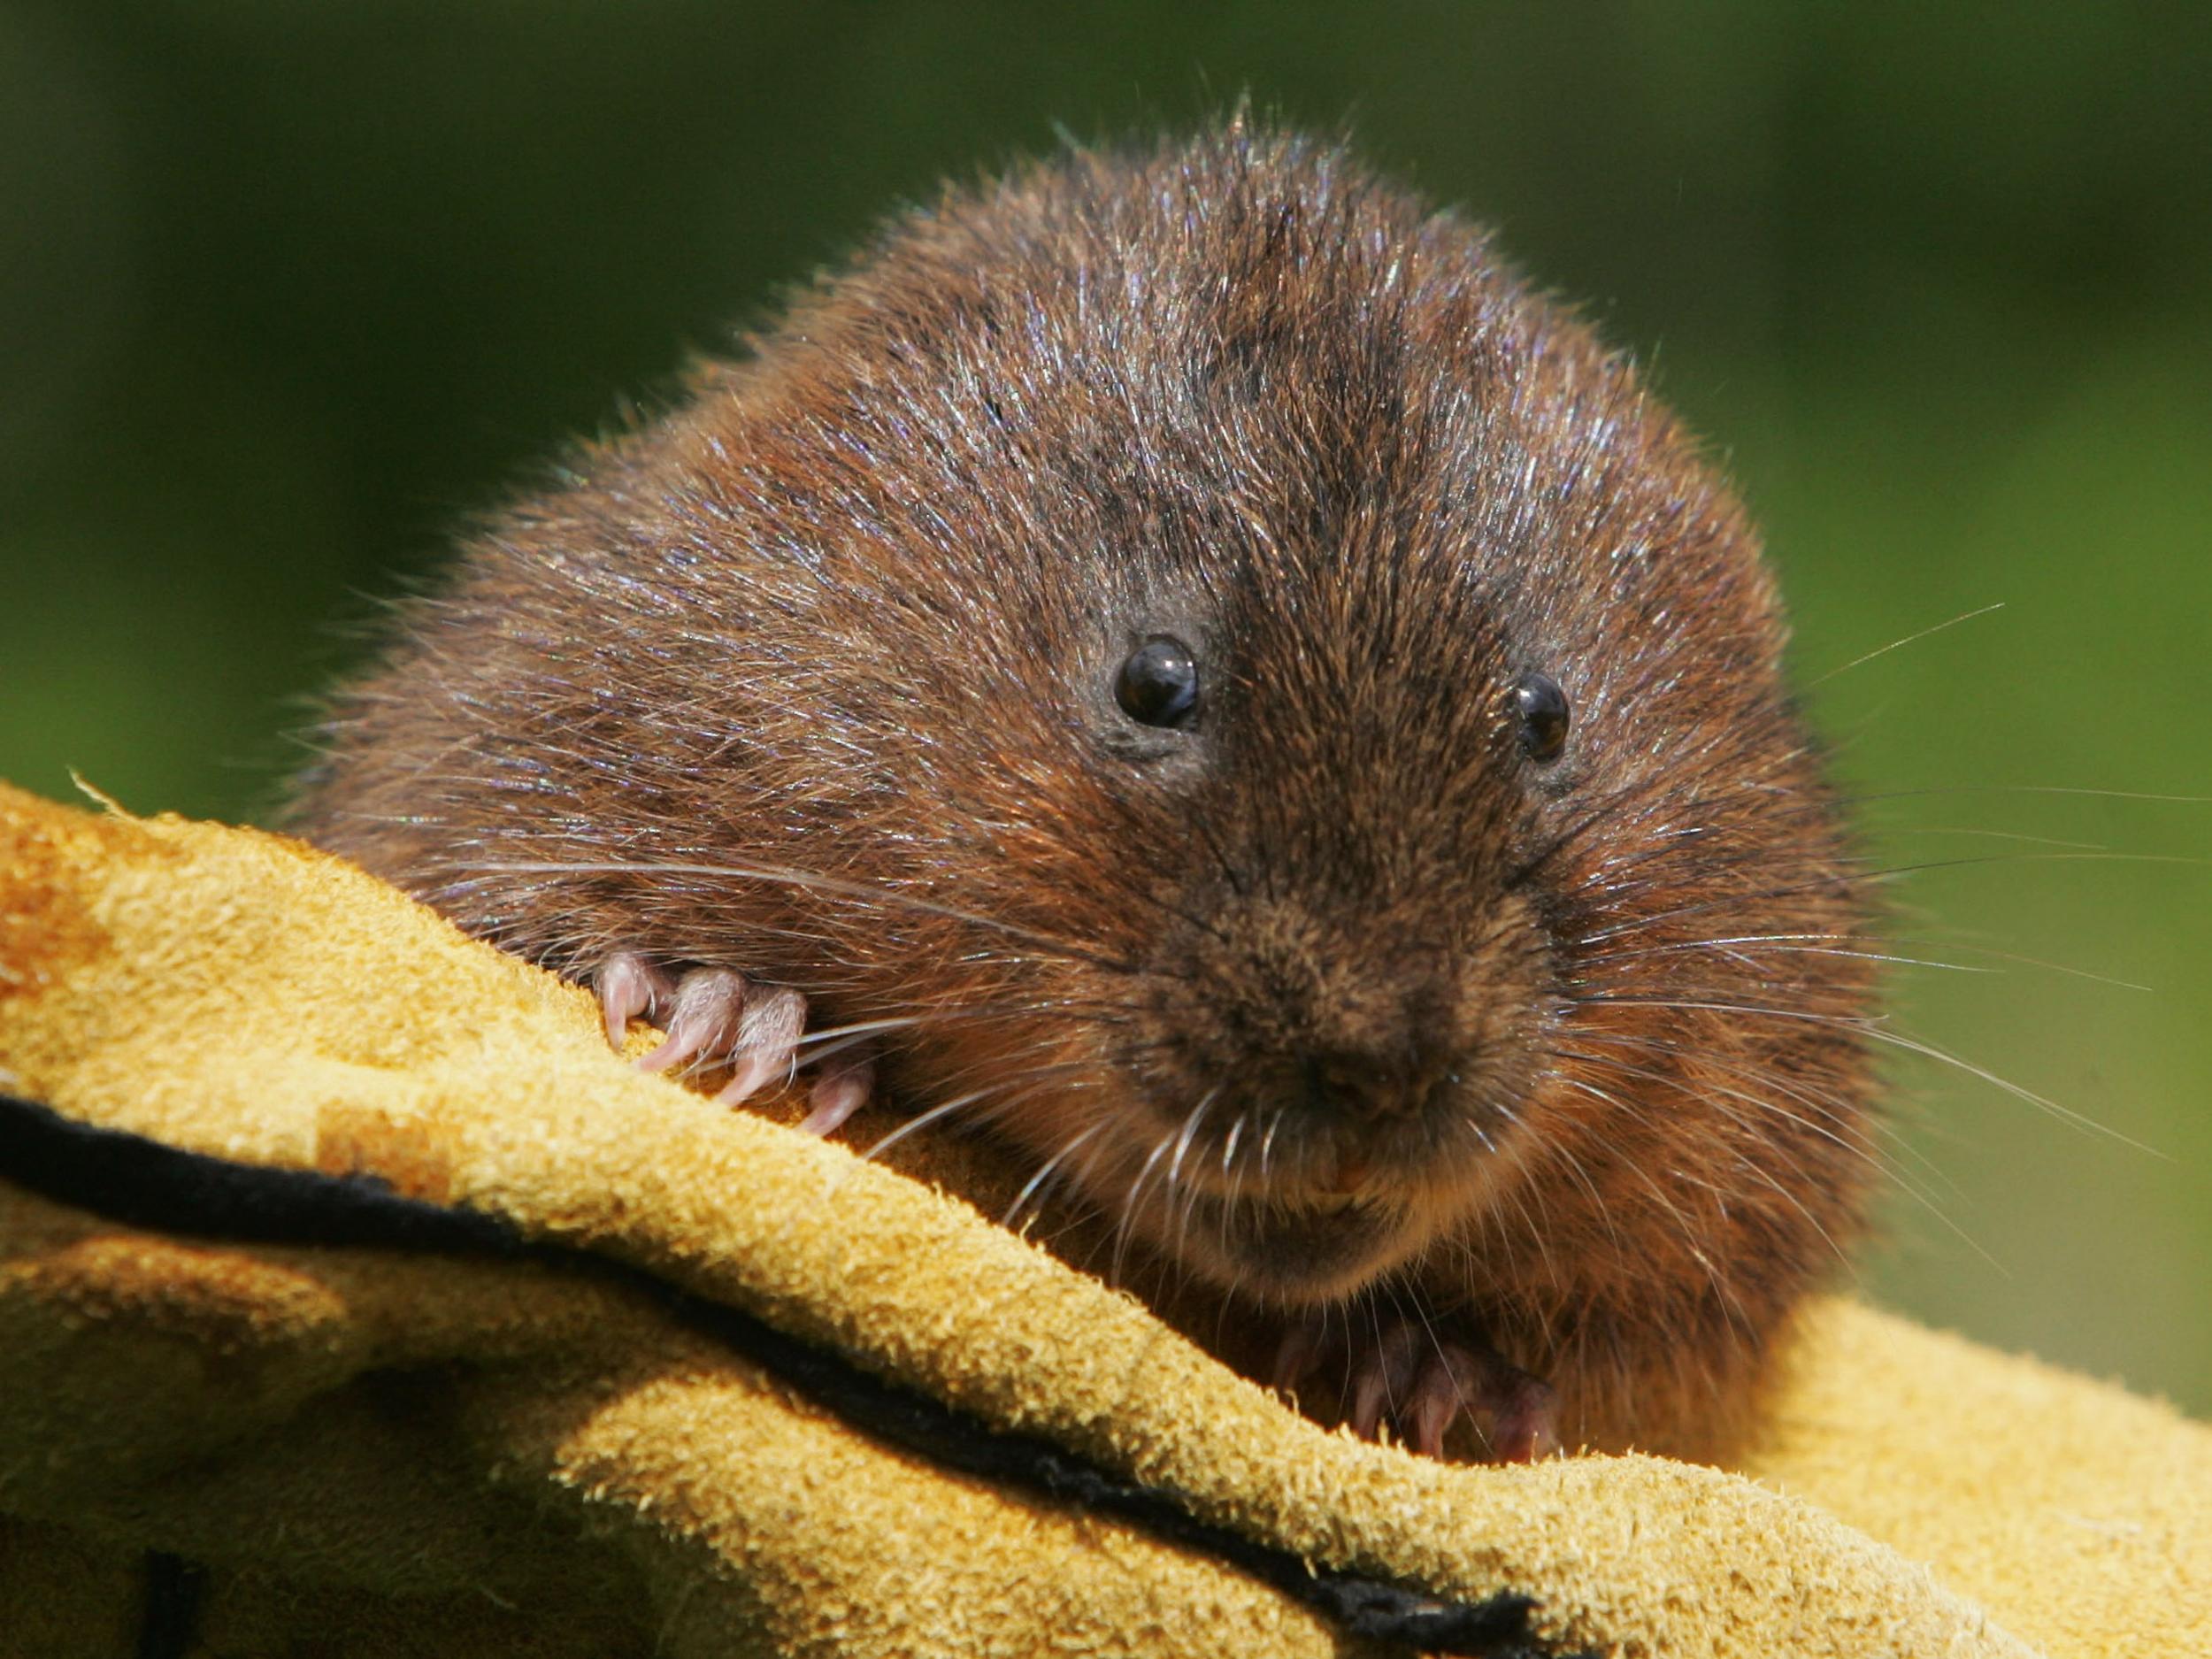 A single mink can eliminate an entire water vole colony